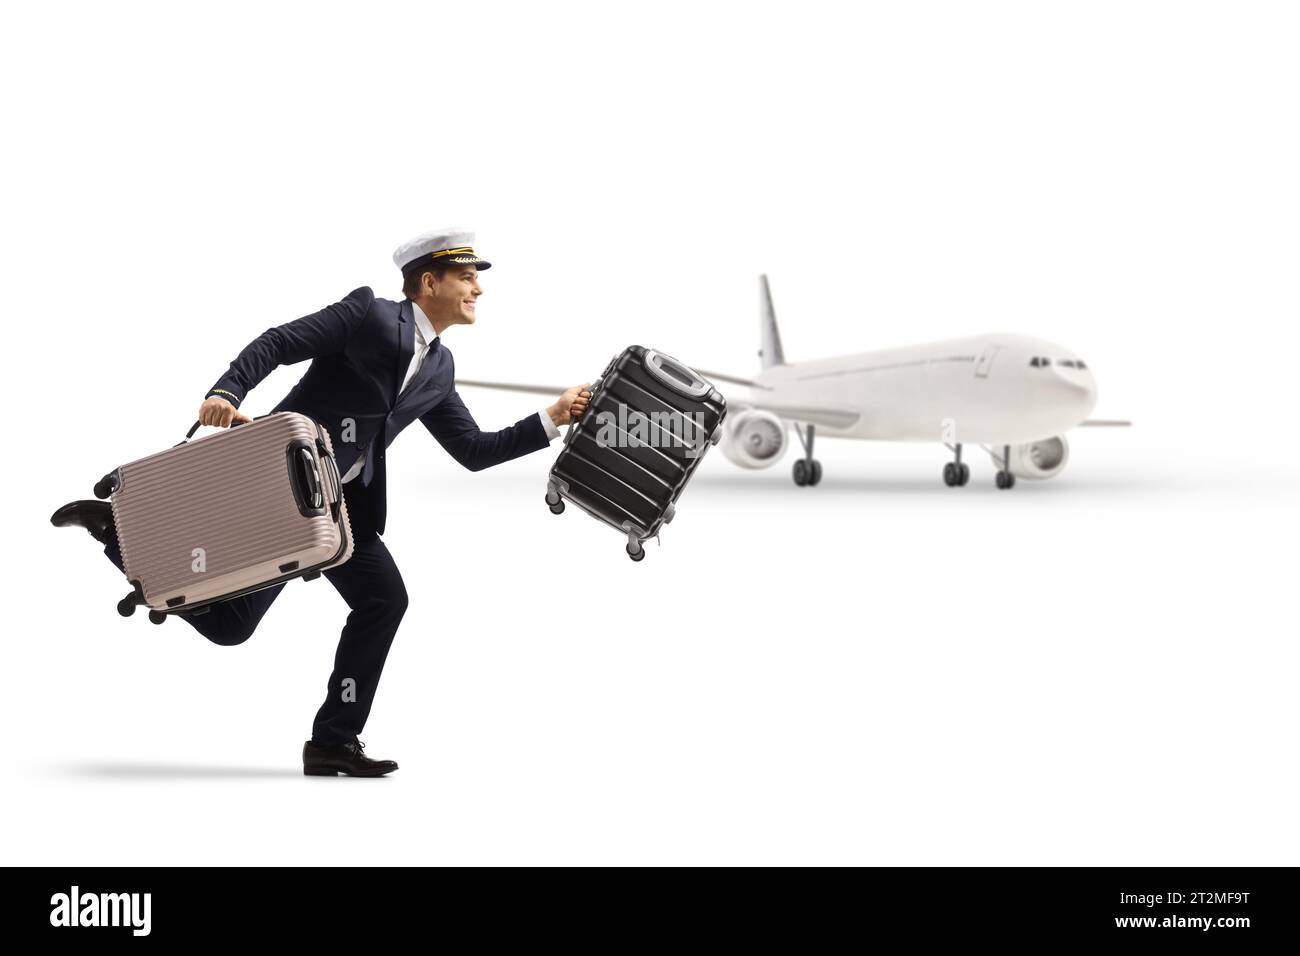 Full length profile shot of a pilot running with suitcases in front of an airplane isolated on white background Stock Photo